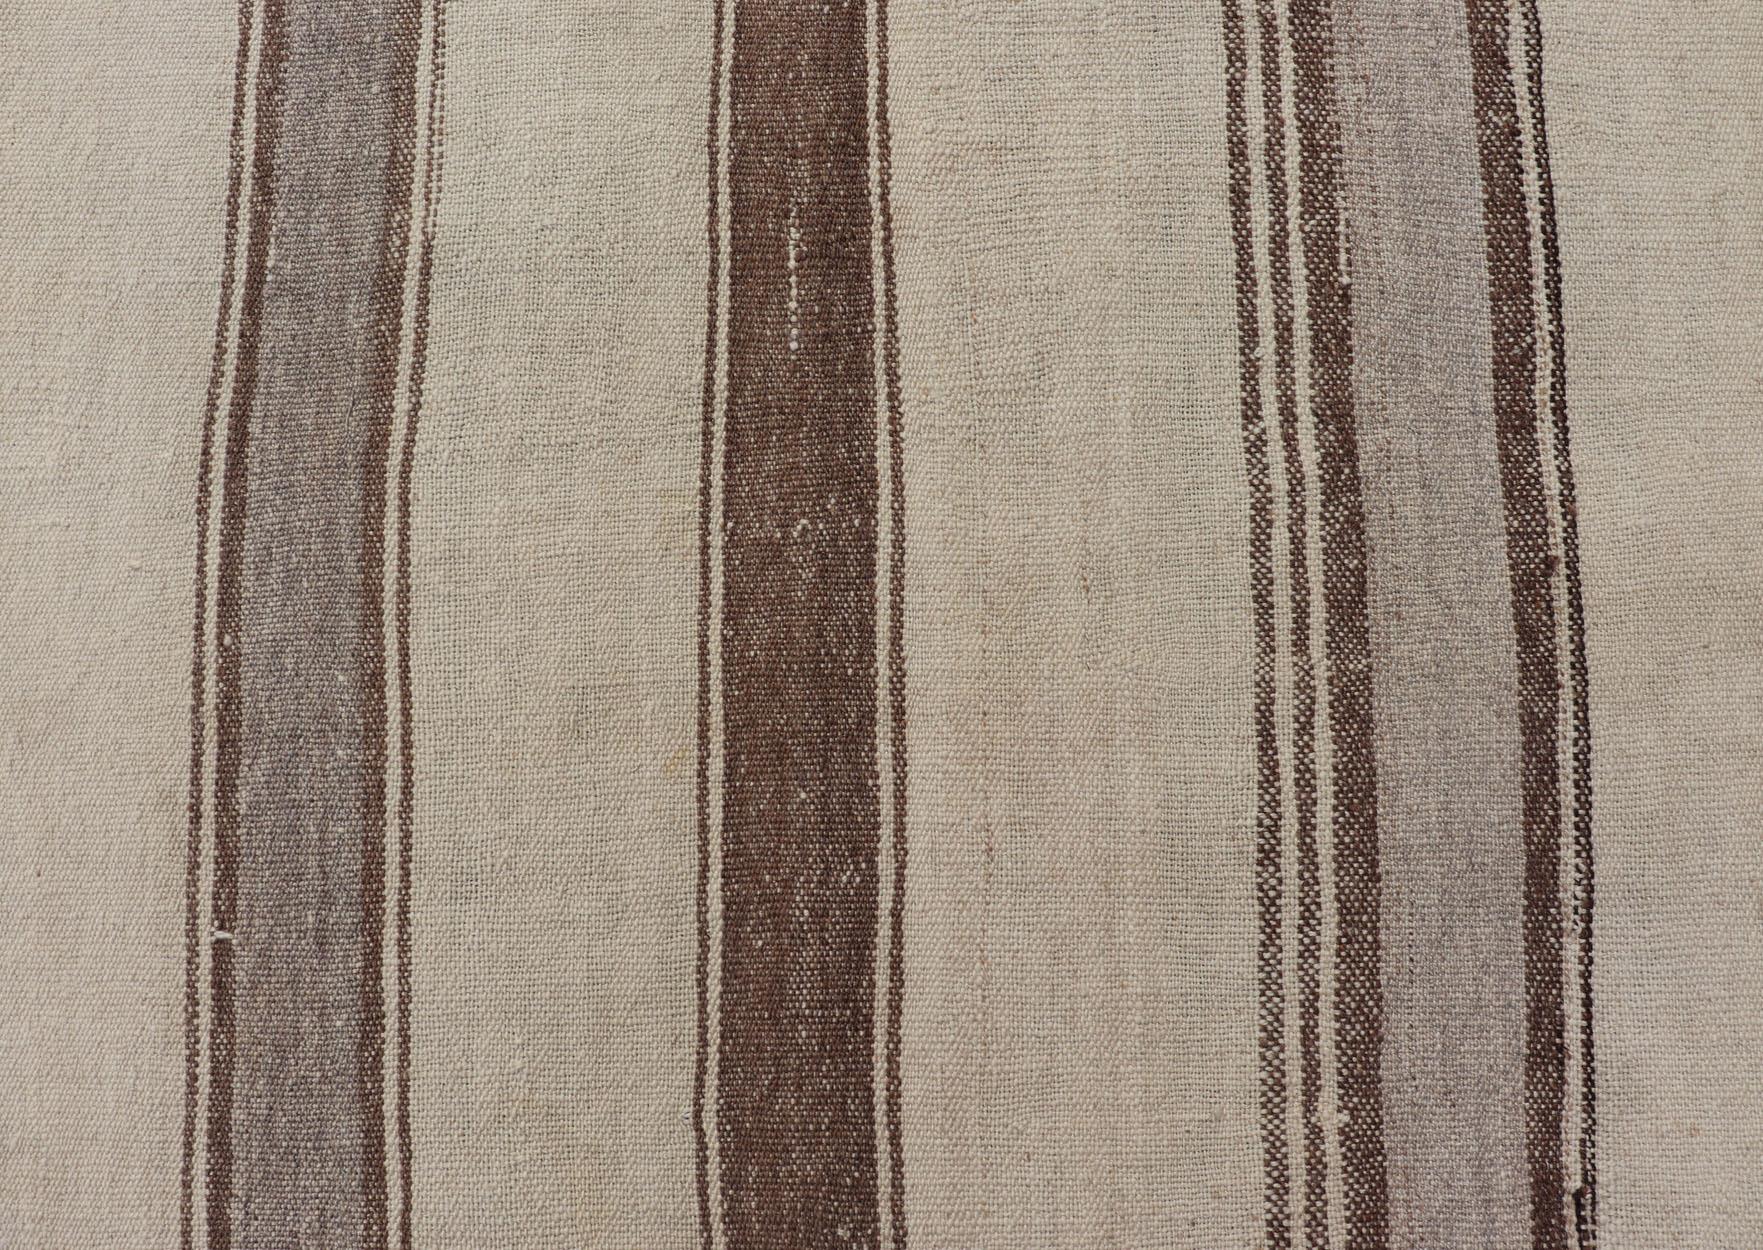 Vintage Turkish Kilim with Stripes in Tan, Gray, Taupe, Cream & Brown For Sale 1